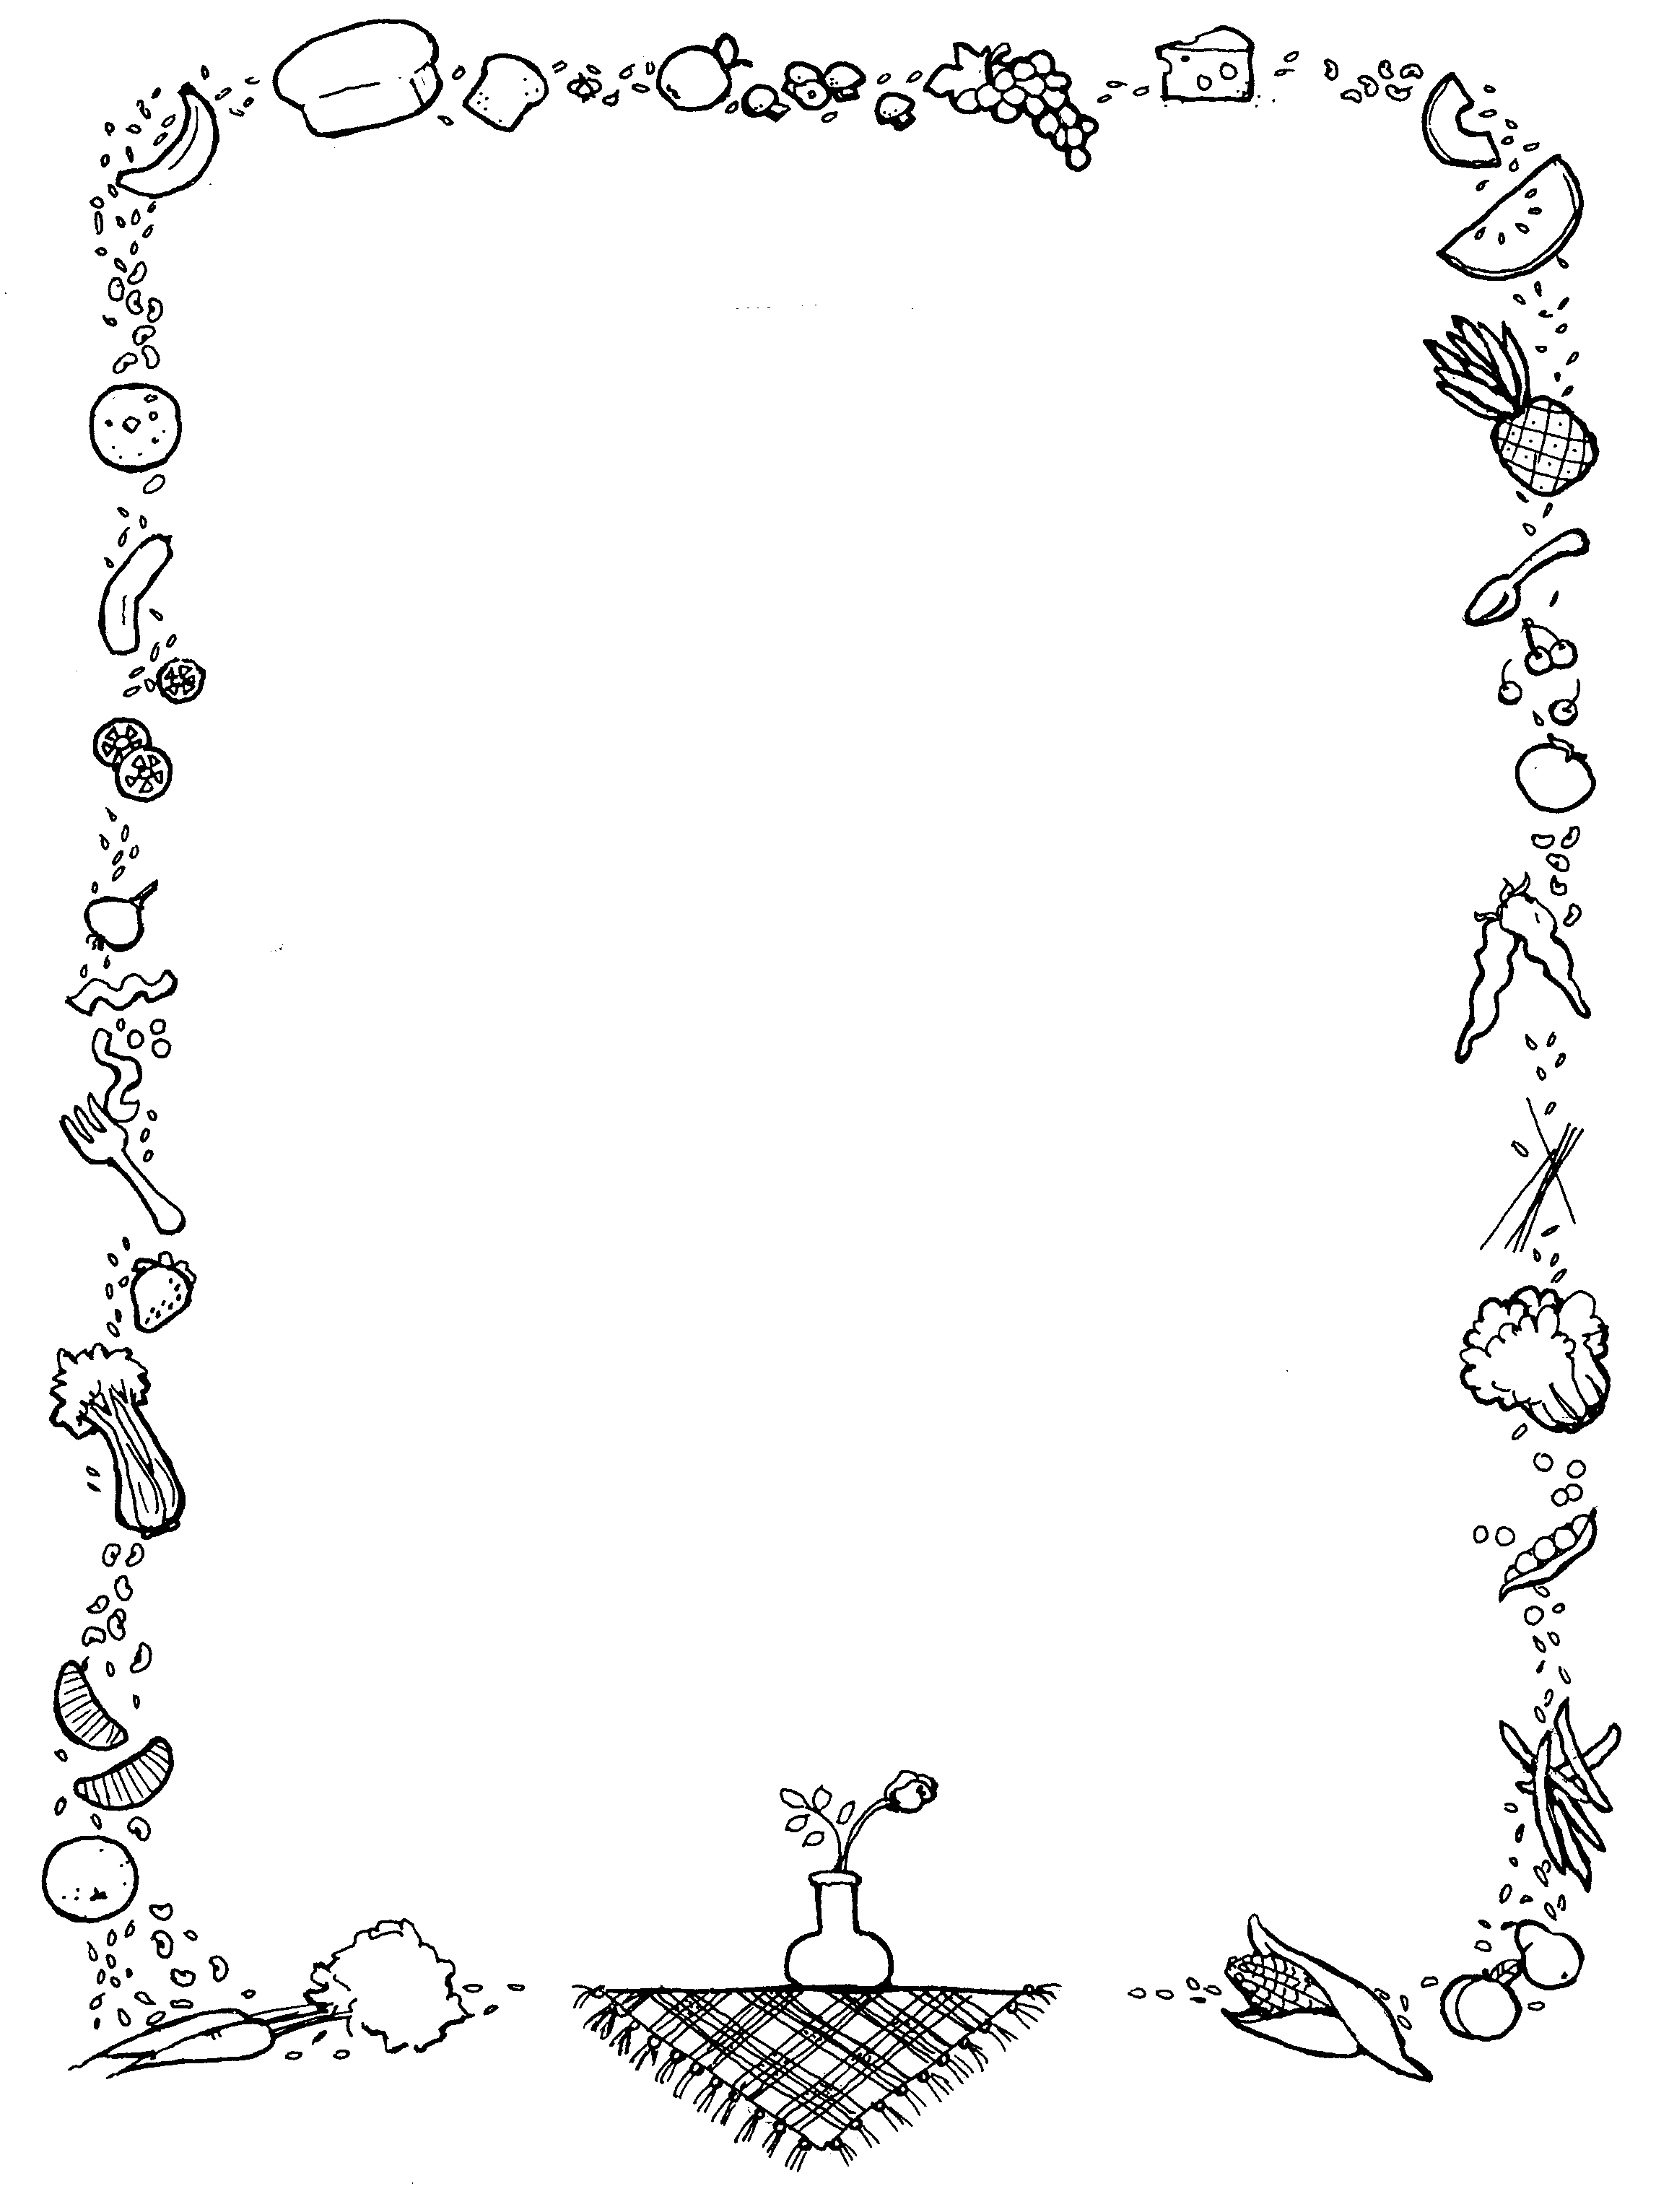 vegetable stand page border